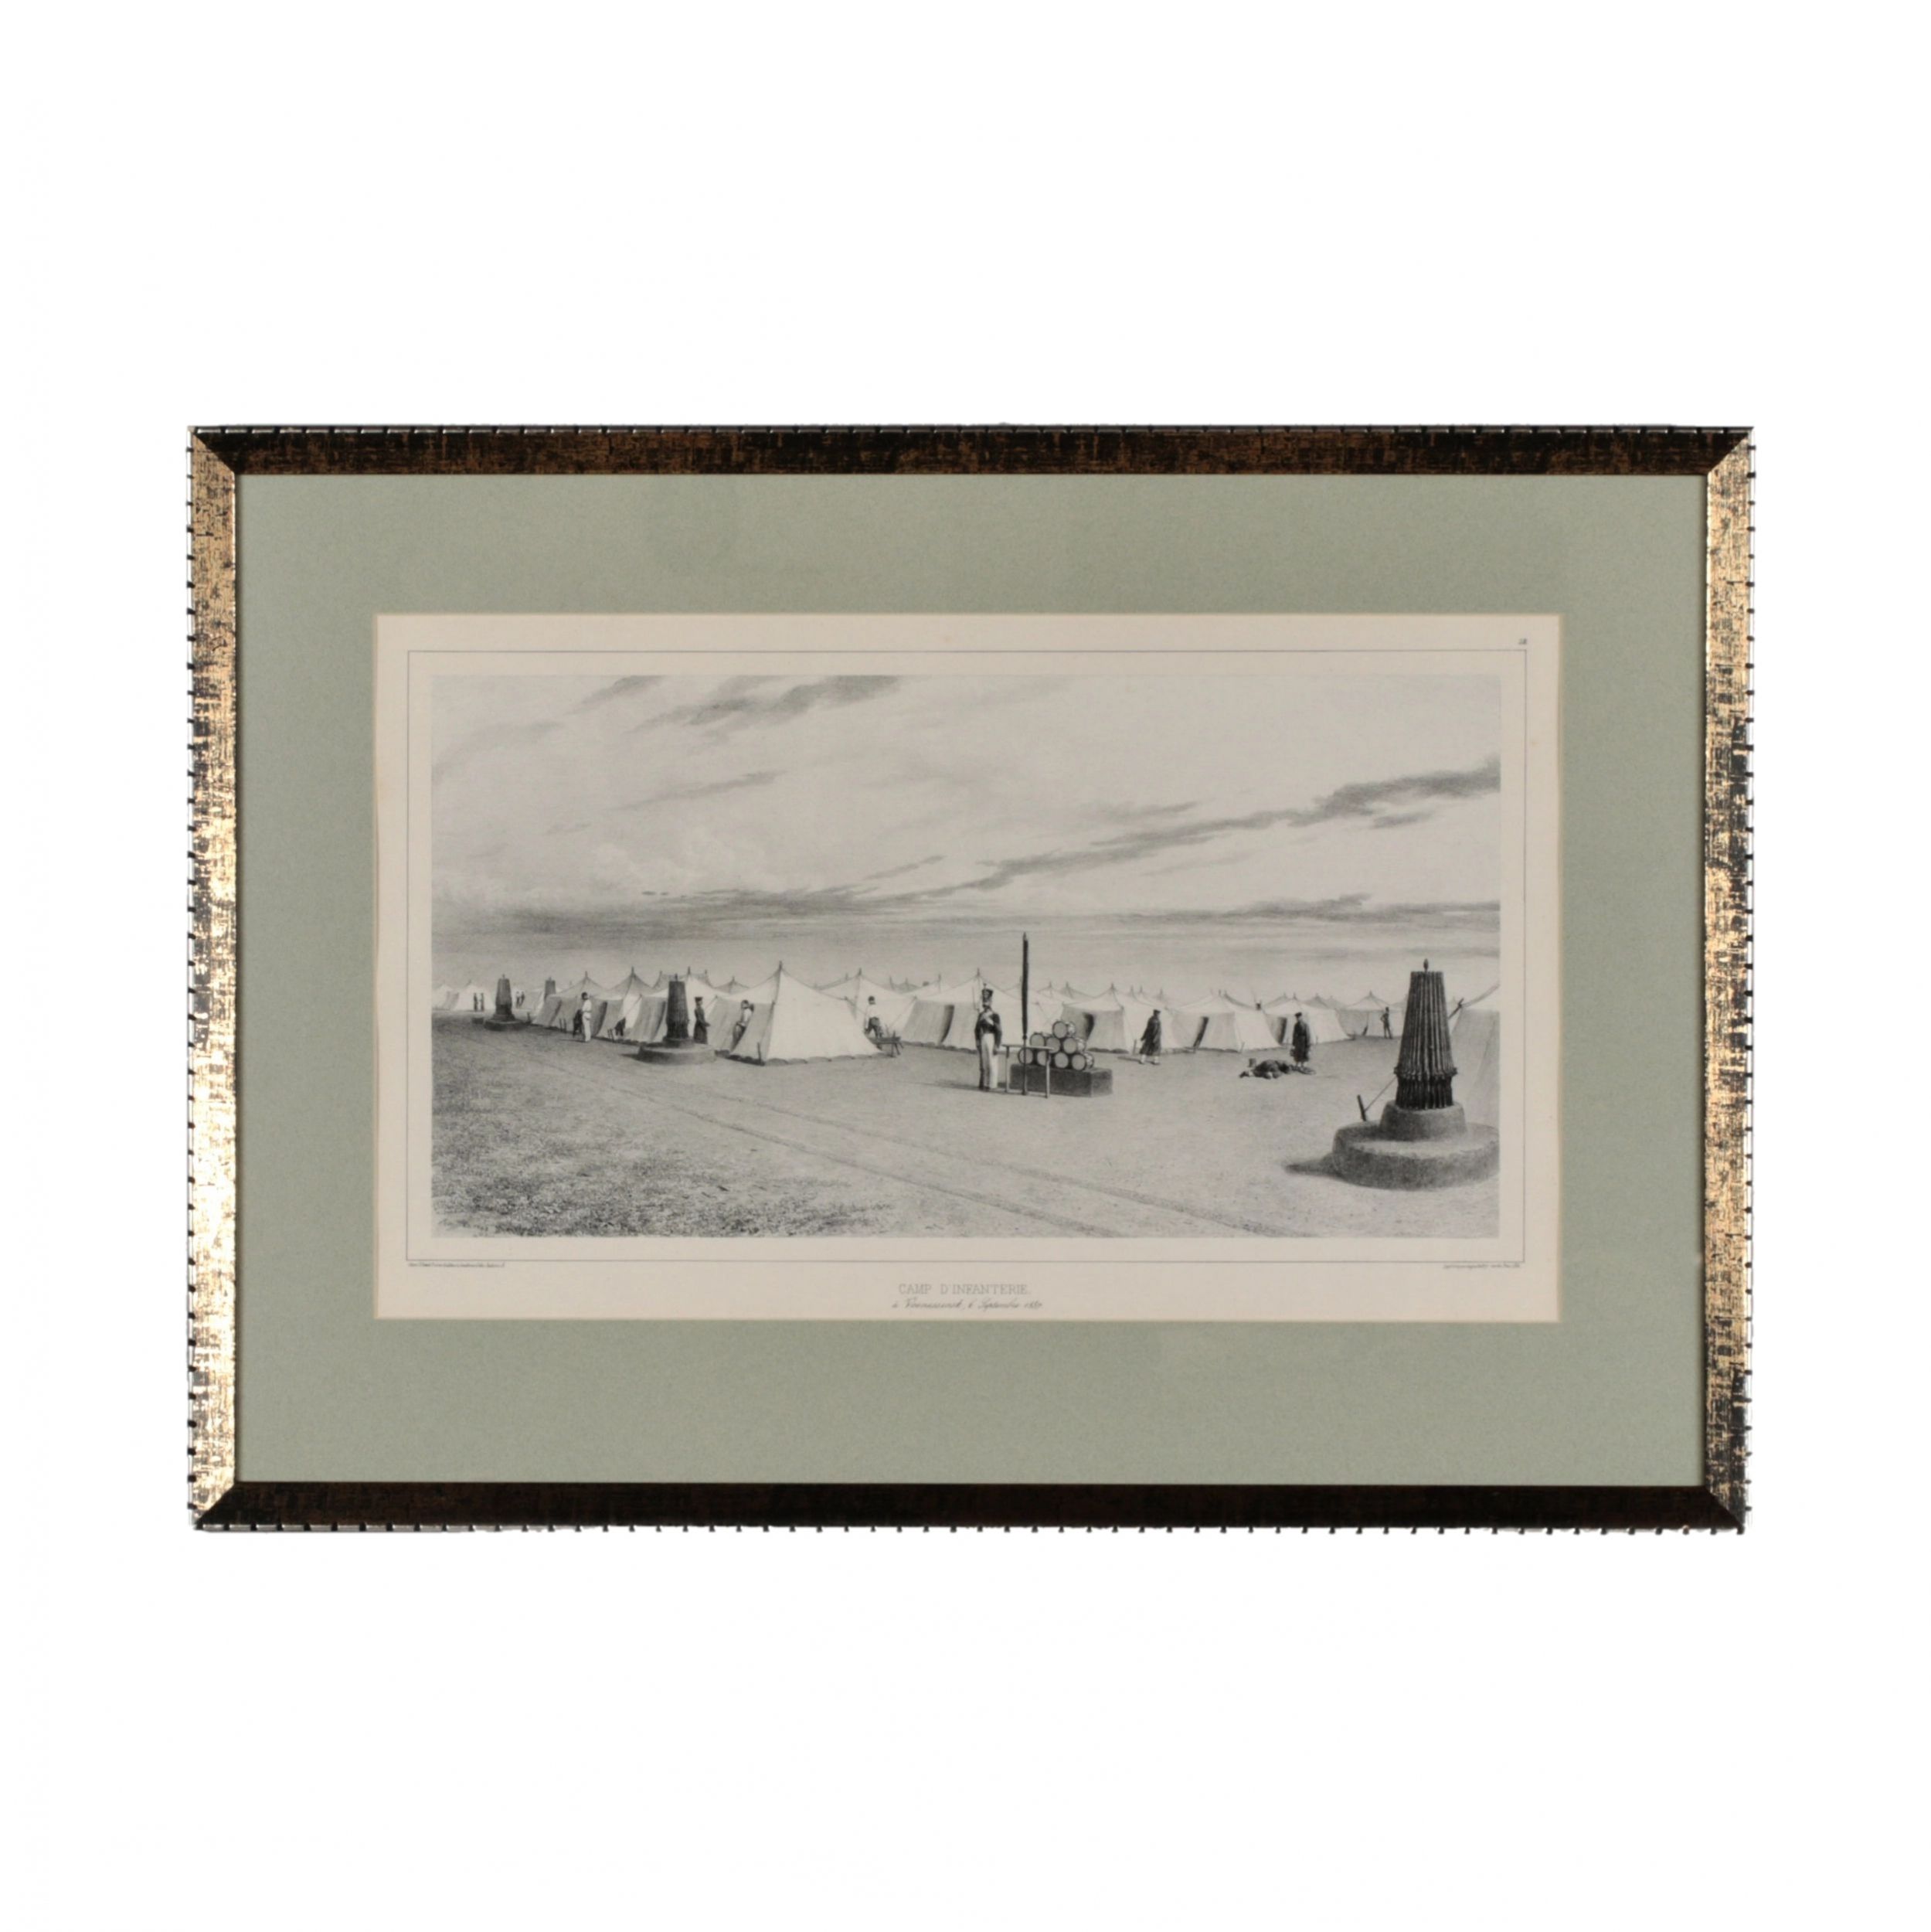 Lithograph-Camp-of-the-infantry-in-Voznesensk-1837-